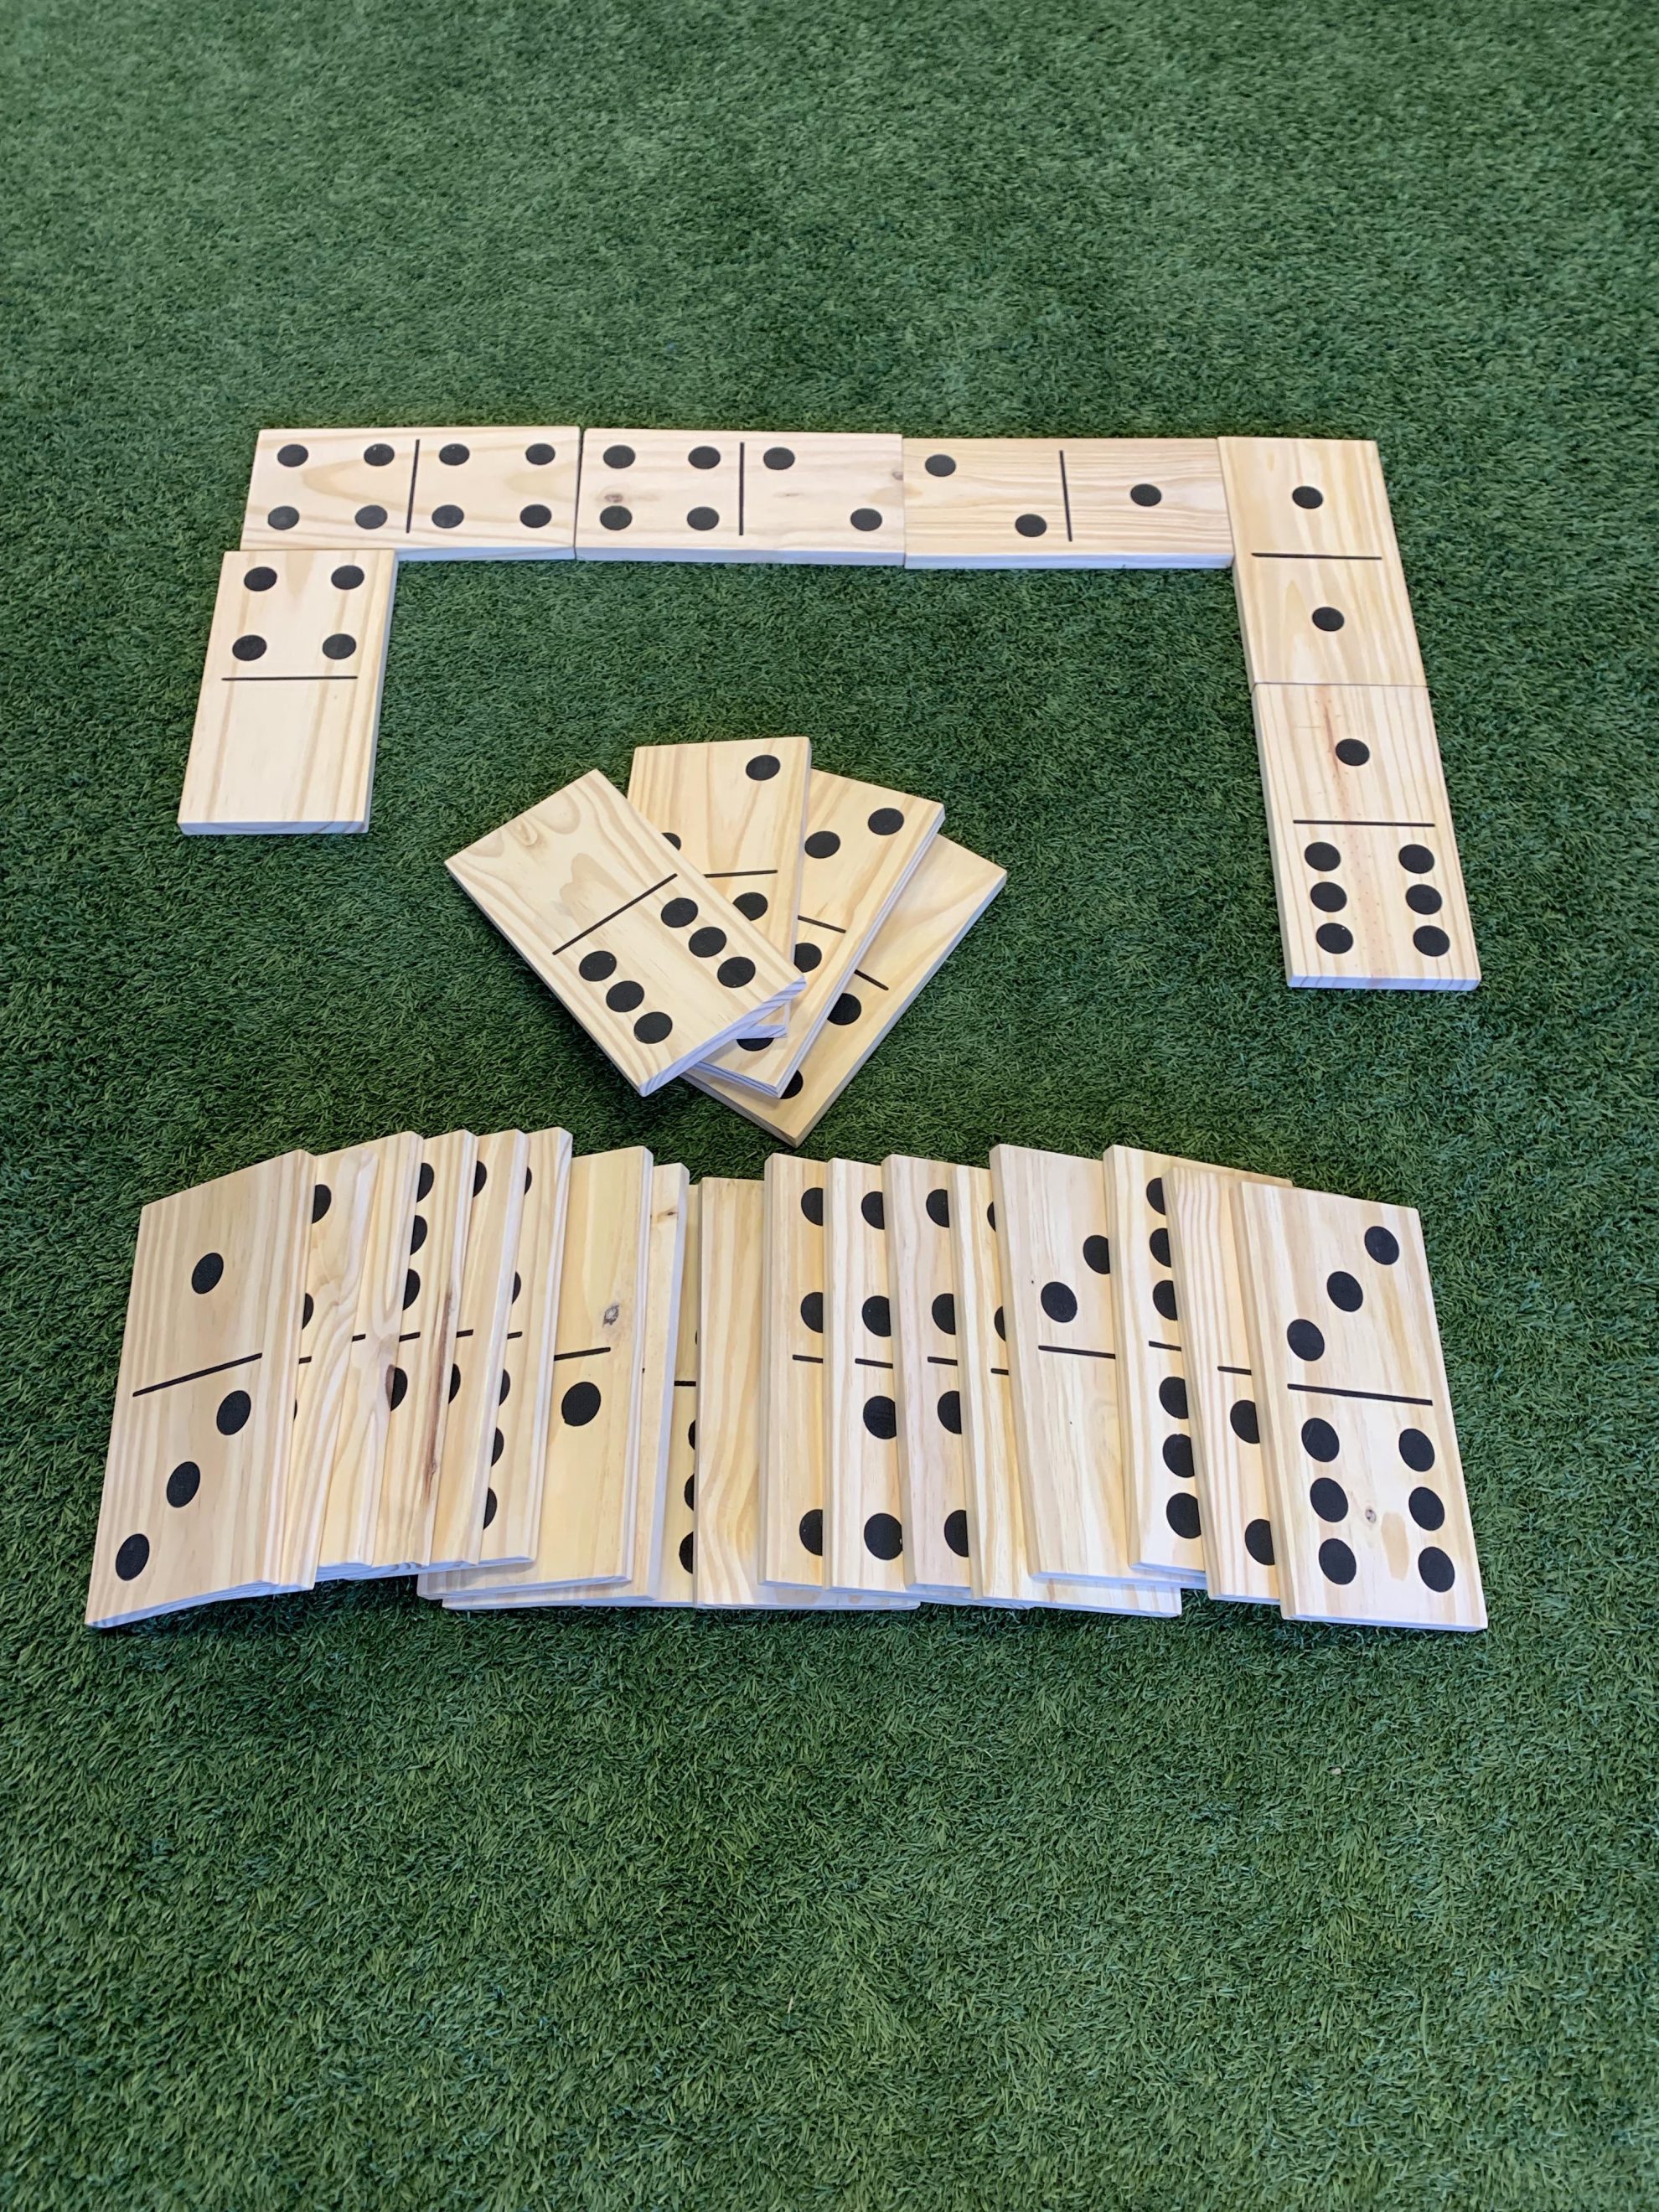 giant-outdoor-dominoes-game-set-with-28-pieces-15cm-treadmill